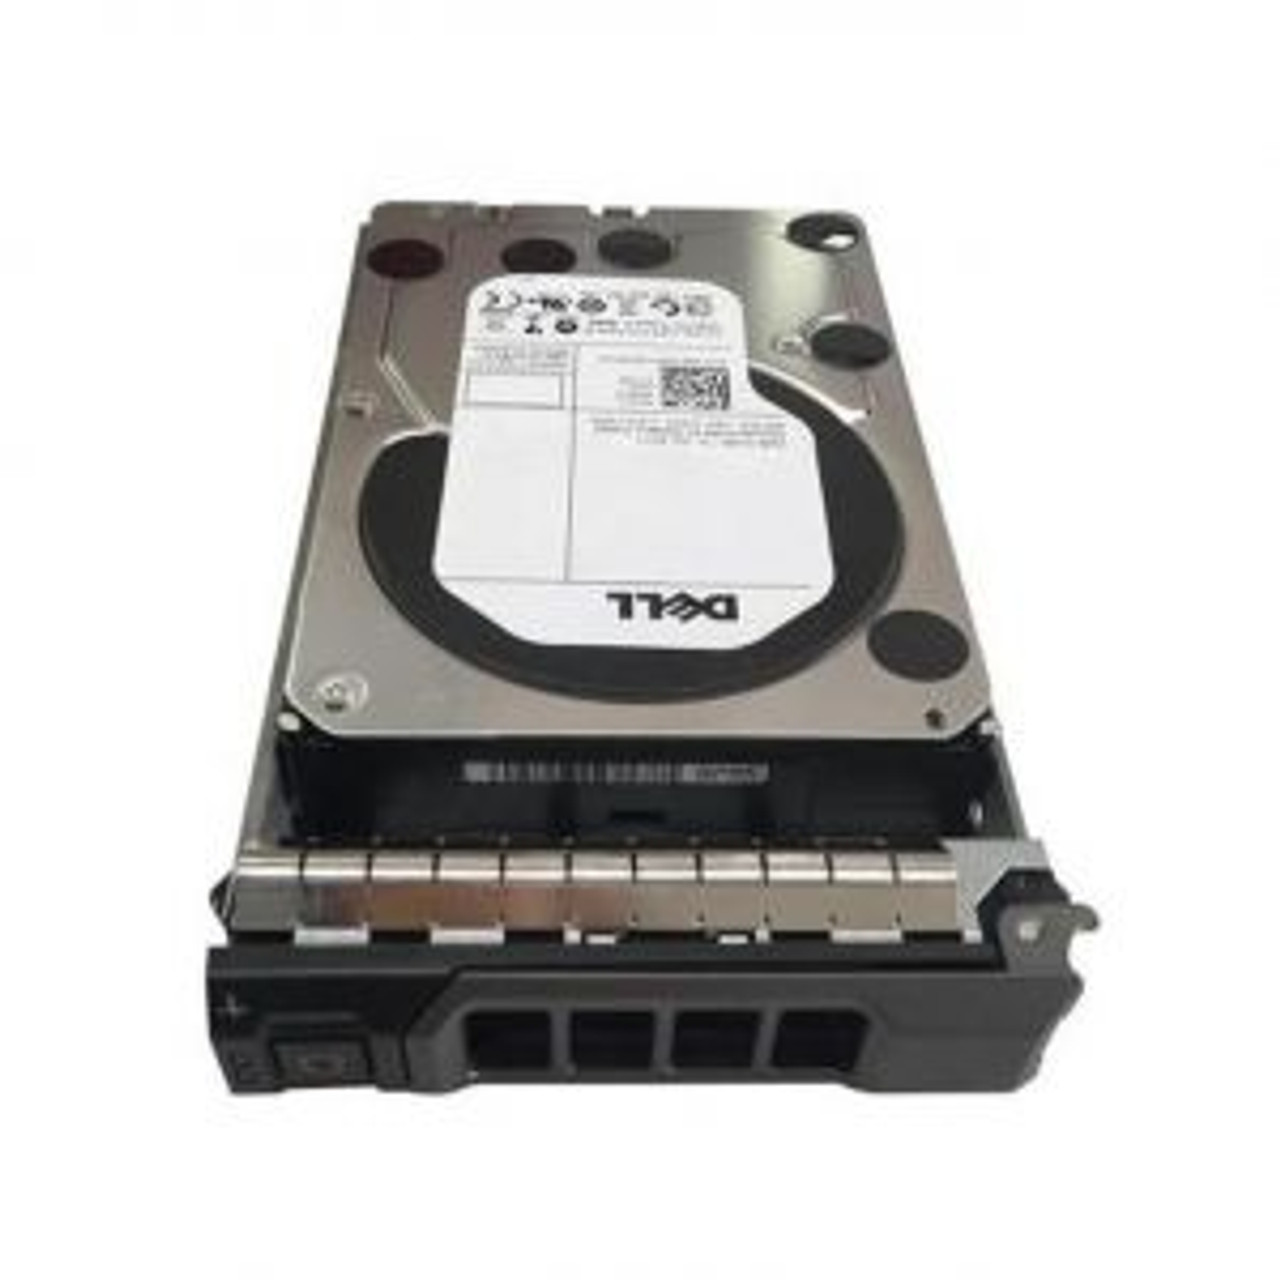 0740XY Dell 1TB 7200RPM SAS 6.0 Gbps 3.5 64MB Cache Hot Swap Hard Drive